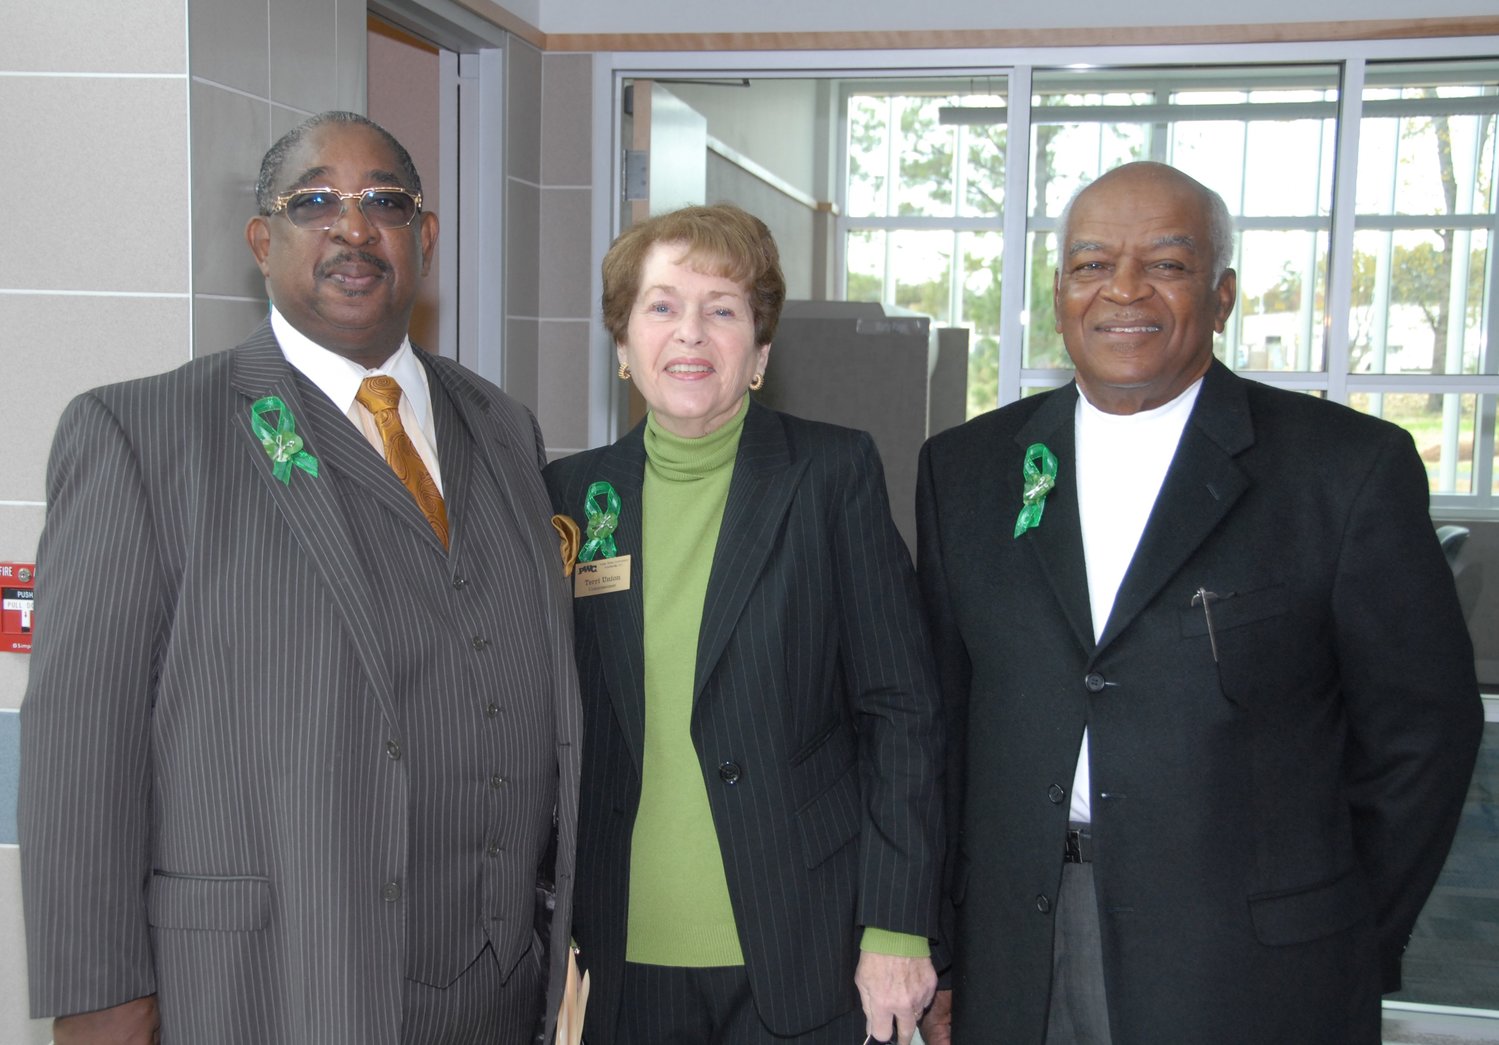 Wilson Lacy with former PWC board members Terri Union and Robert C. Williams at the opening of the PWC Customer Service Center in 2009.